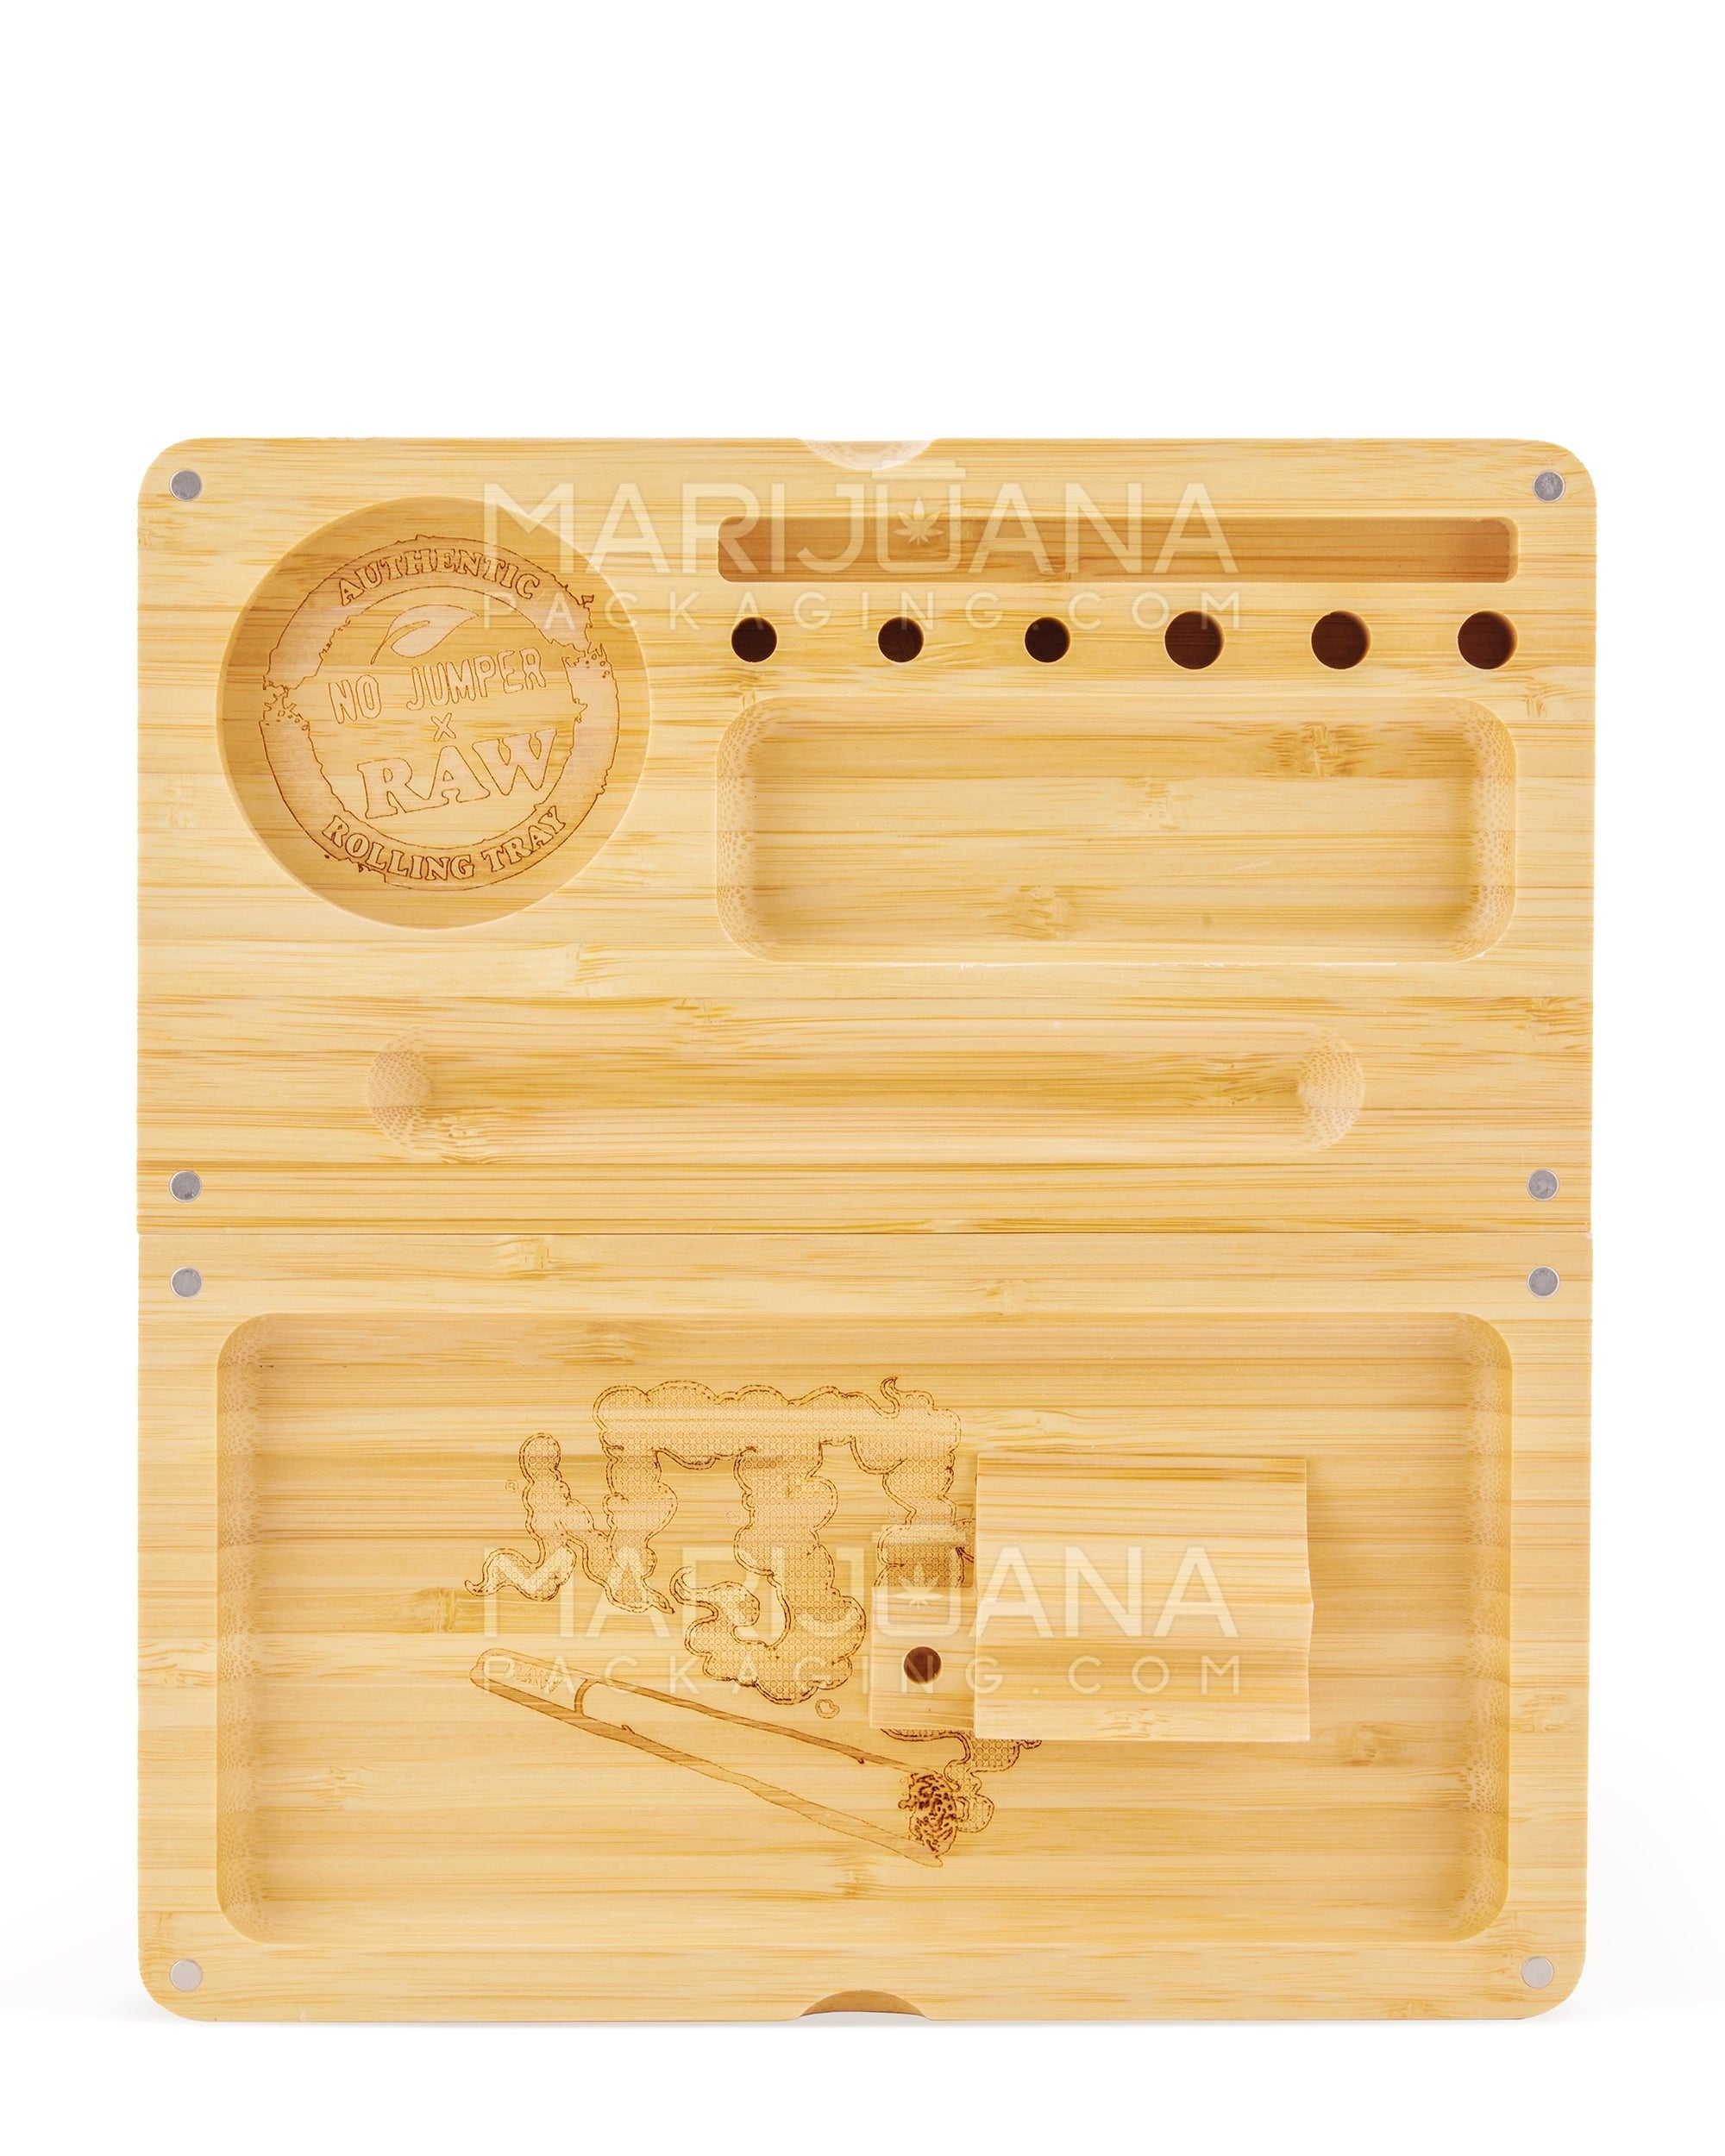 RAW | No Jumpers Backflip Magnetic Wood Rolling Tray | 14in x 11in - Large - Wood - 2